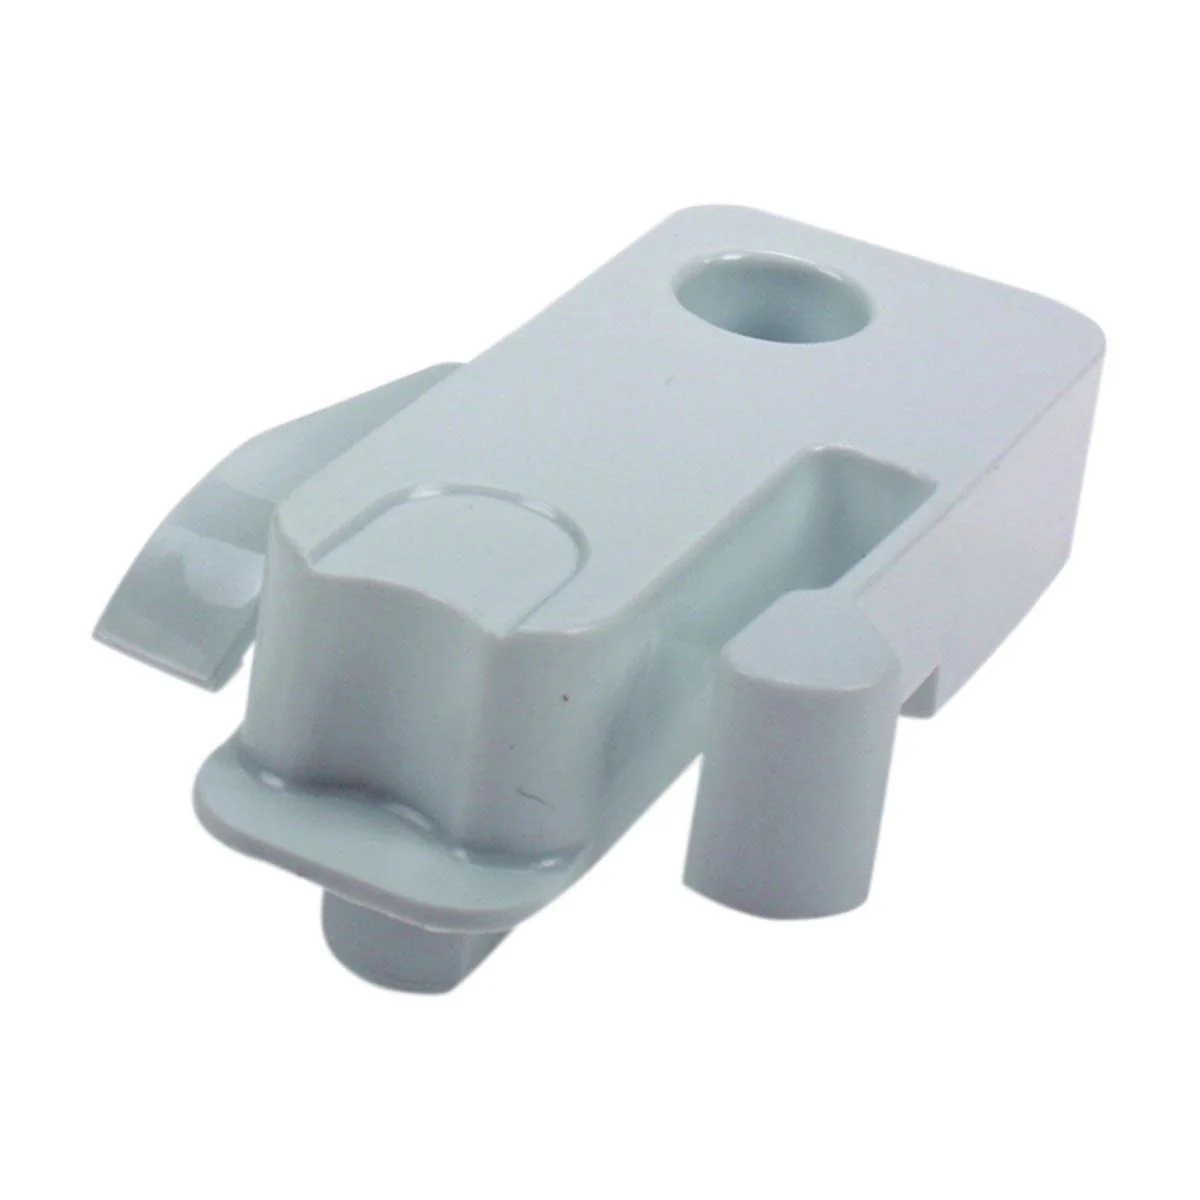 Left-hand door holder for the WHIRLPOOL/INDESIT freezer. C00506171 FREEZER FLAP STOPPER LINKS GW Holders for household refrigerators, drawers, shelves and other plastic details